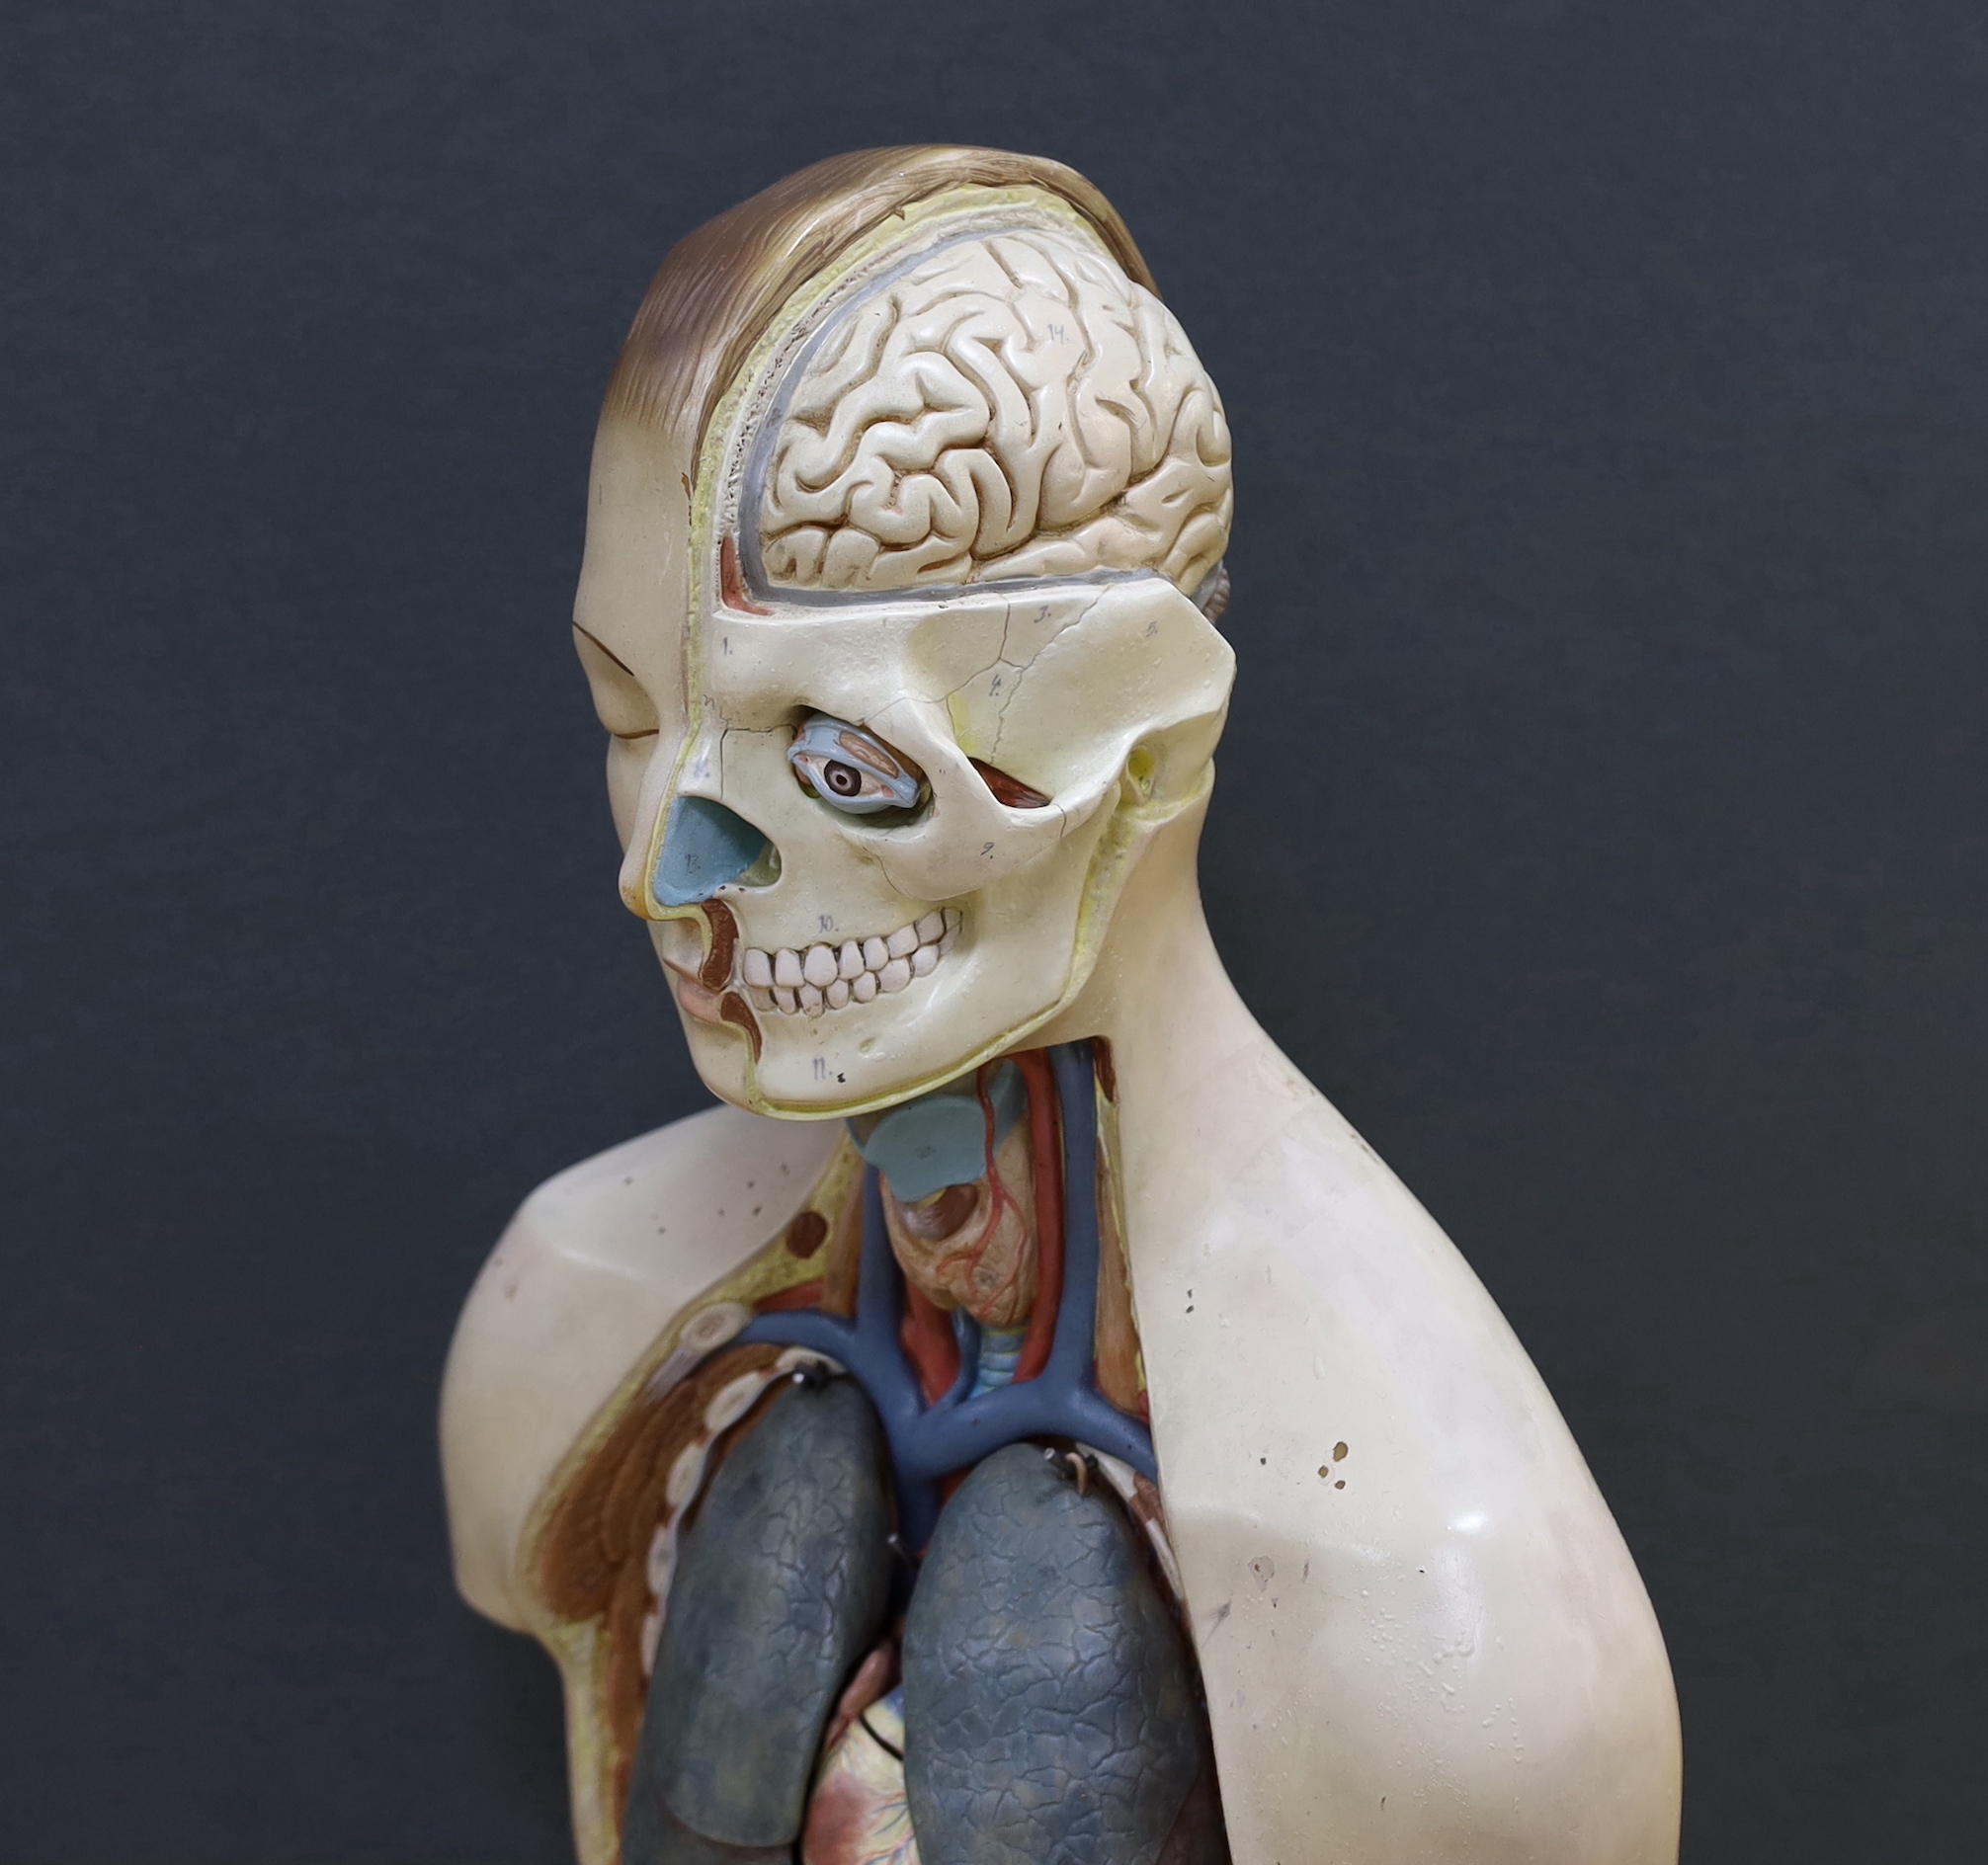 A 1950s/60s medical school educational plastic and painted composite anatomical model on base by E.E.I. Made in Iran, with removable internal organs and cross-sections of skeleton, arterial system, muscular structures, e